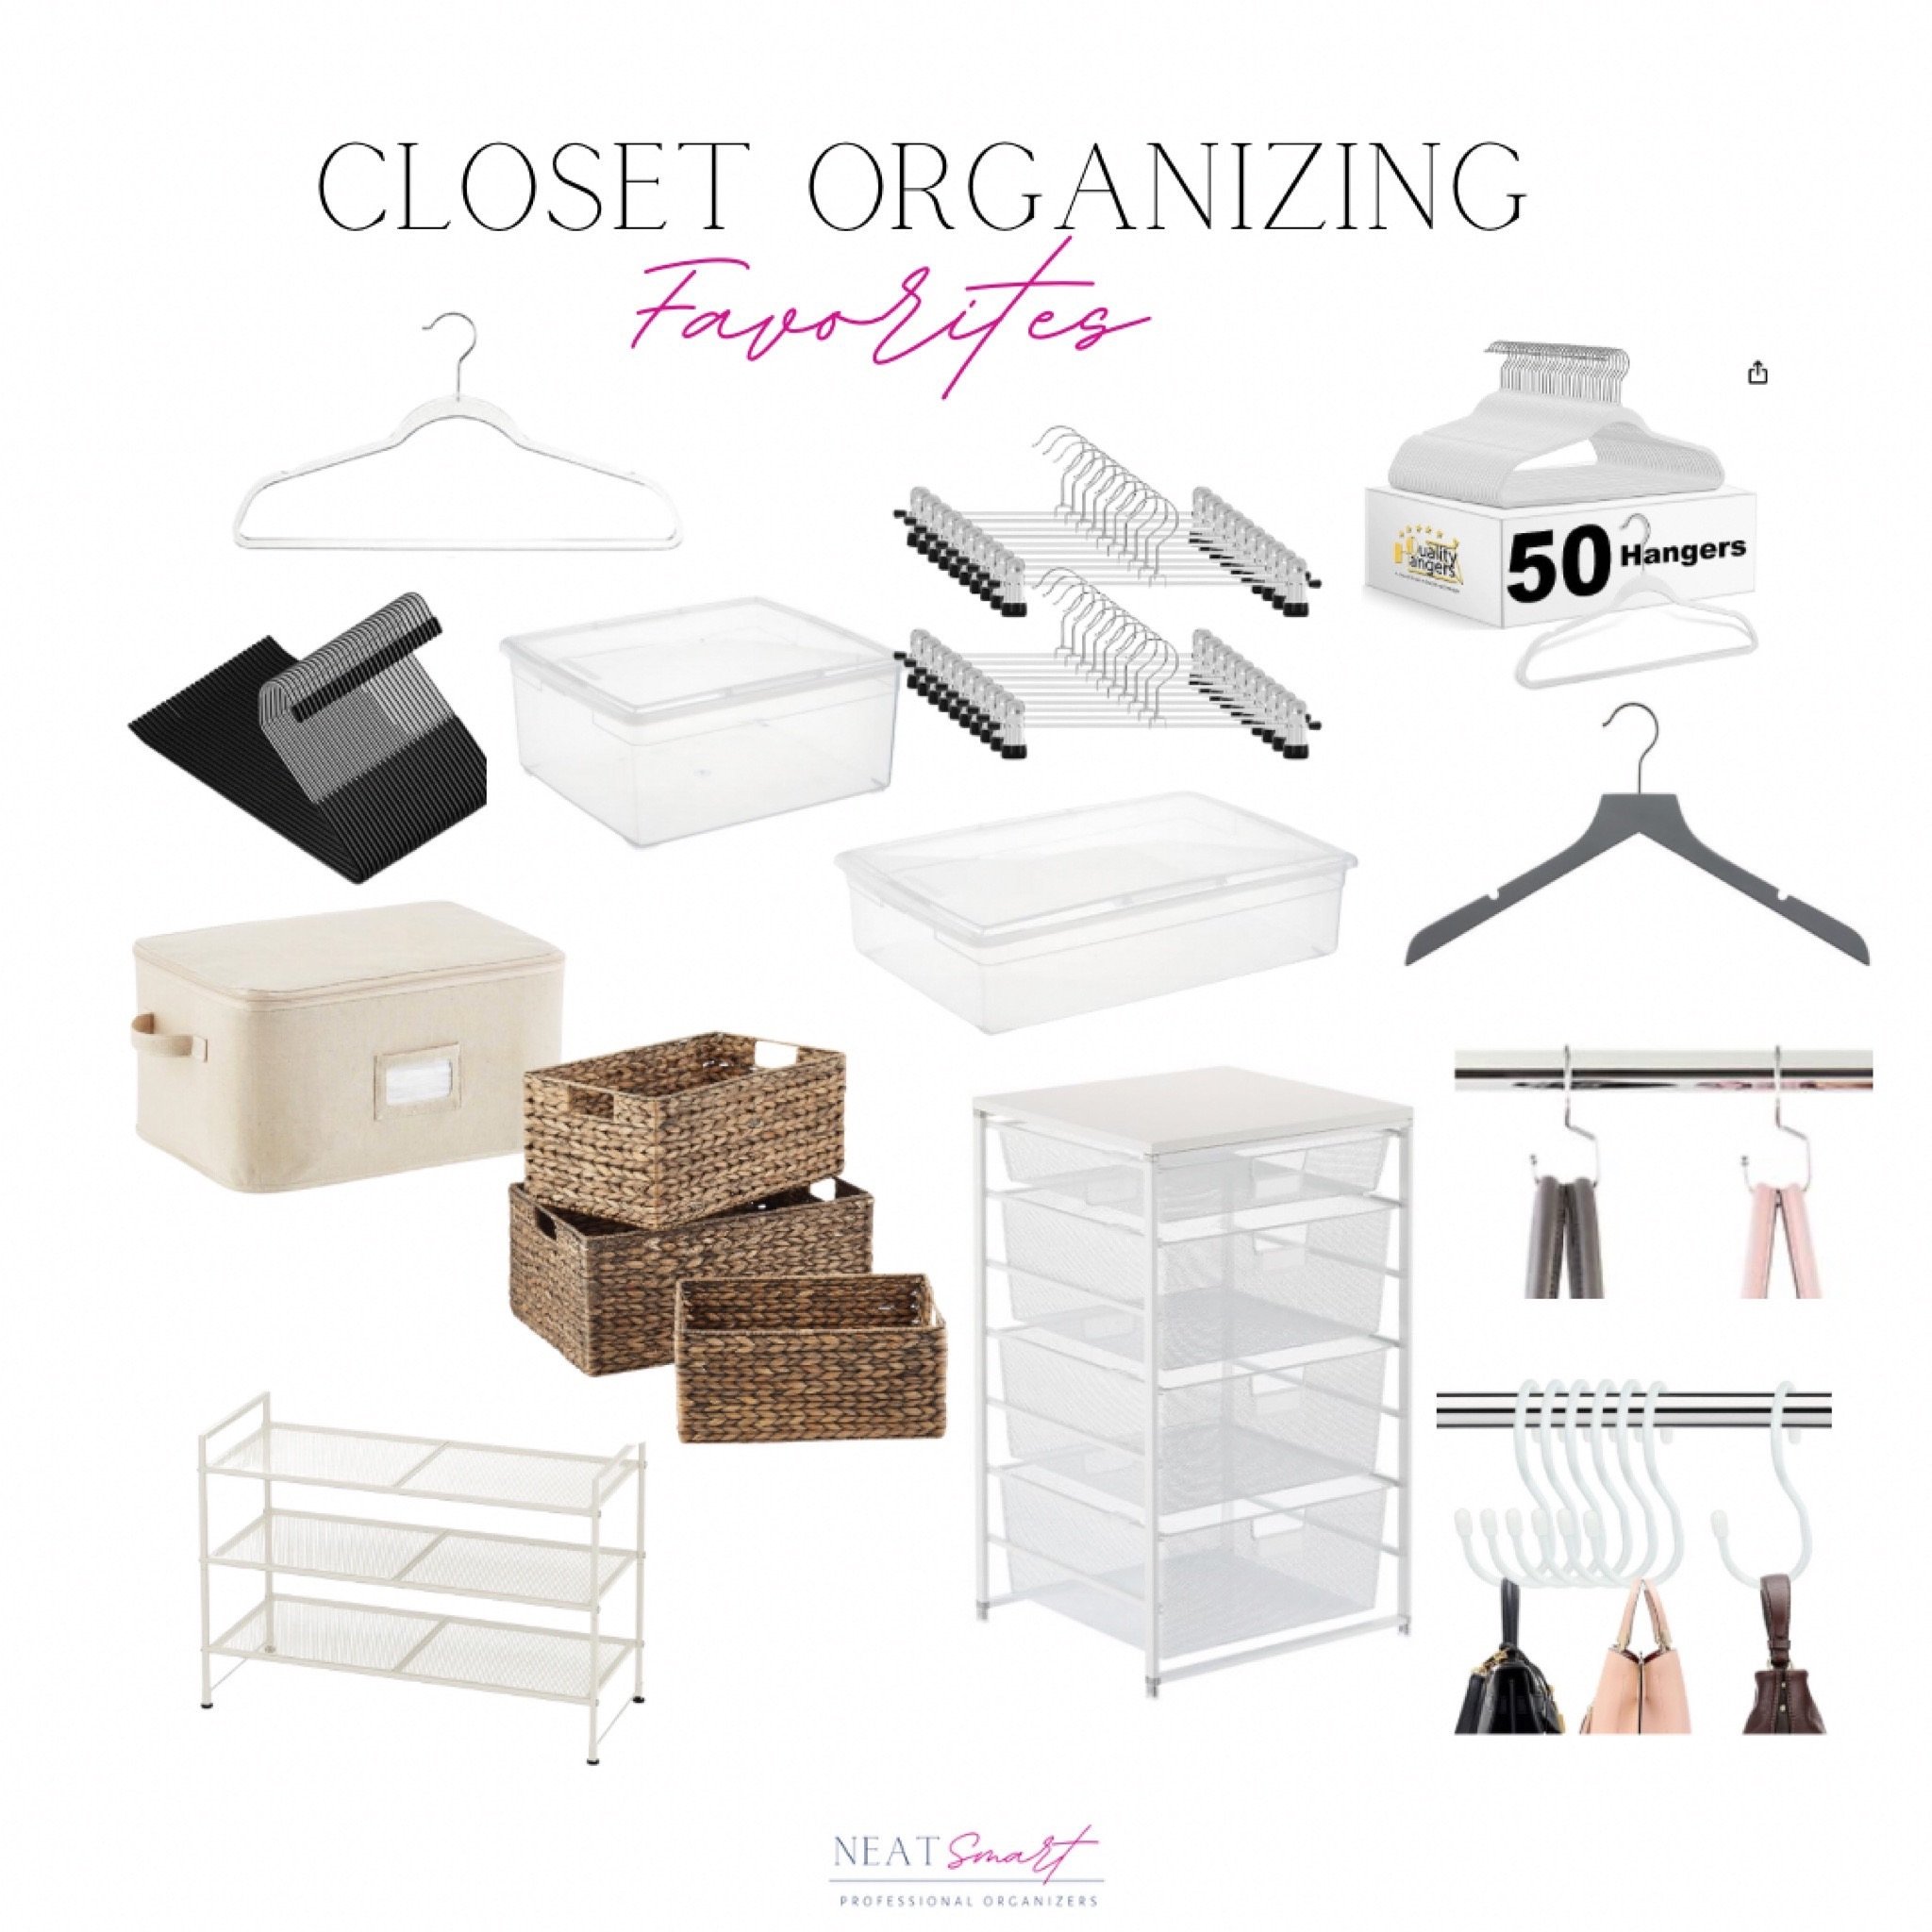 While you&rsquo;re editing your closet, maximize your space and make attractive with matching hangers. 

These are some of my favorite tools for organizing clothes closets. The right tools make a huge difference! If it&rsquo;s pretty, you&rsquo;re mo